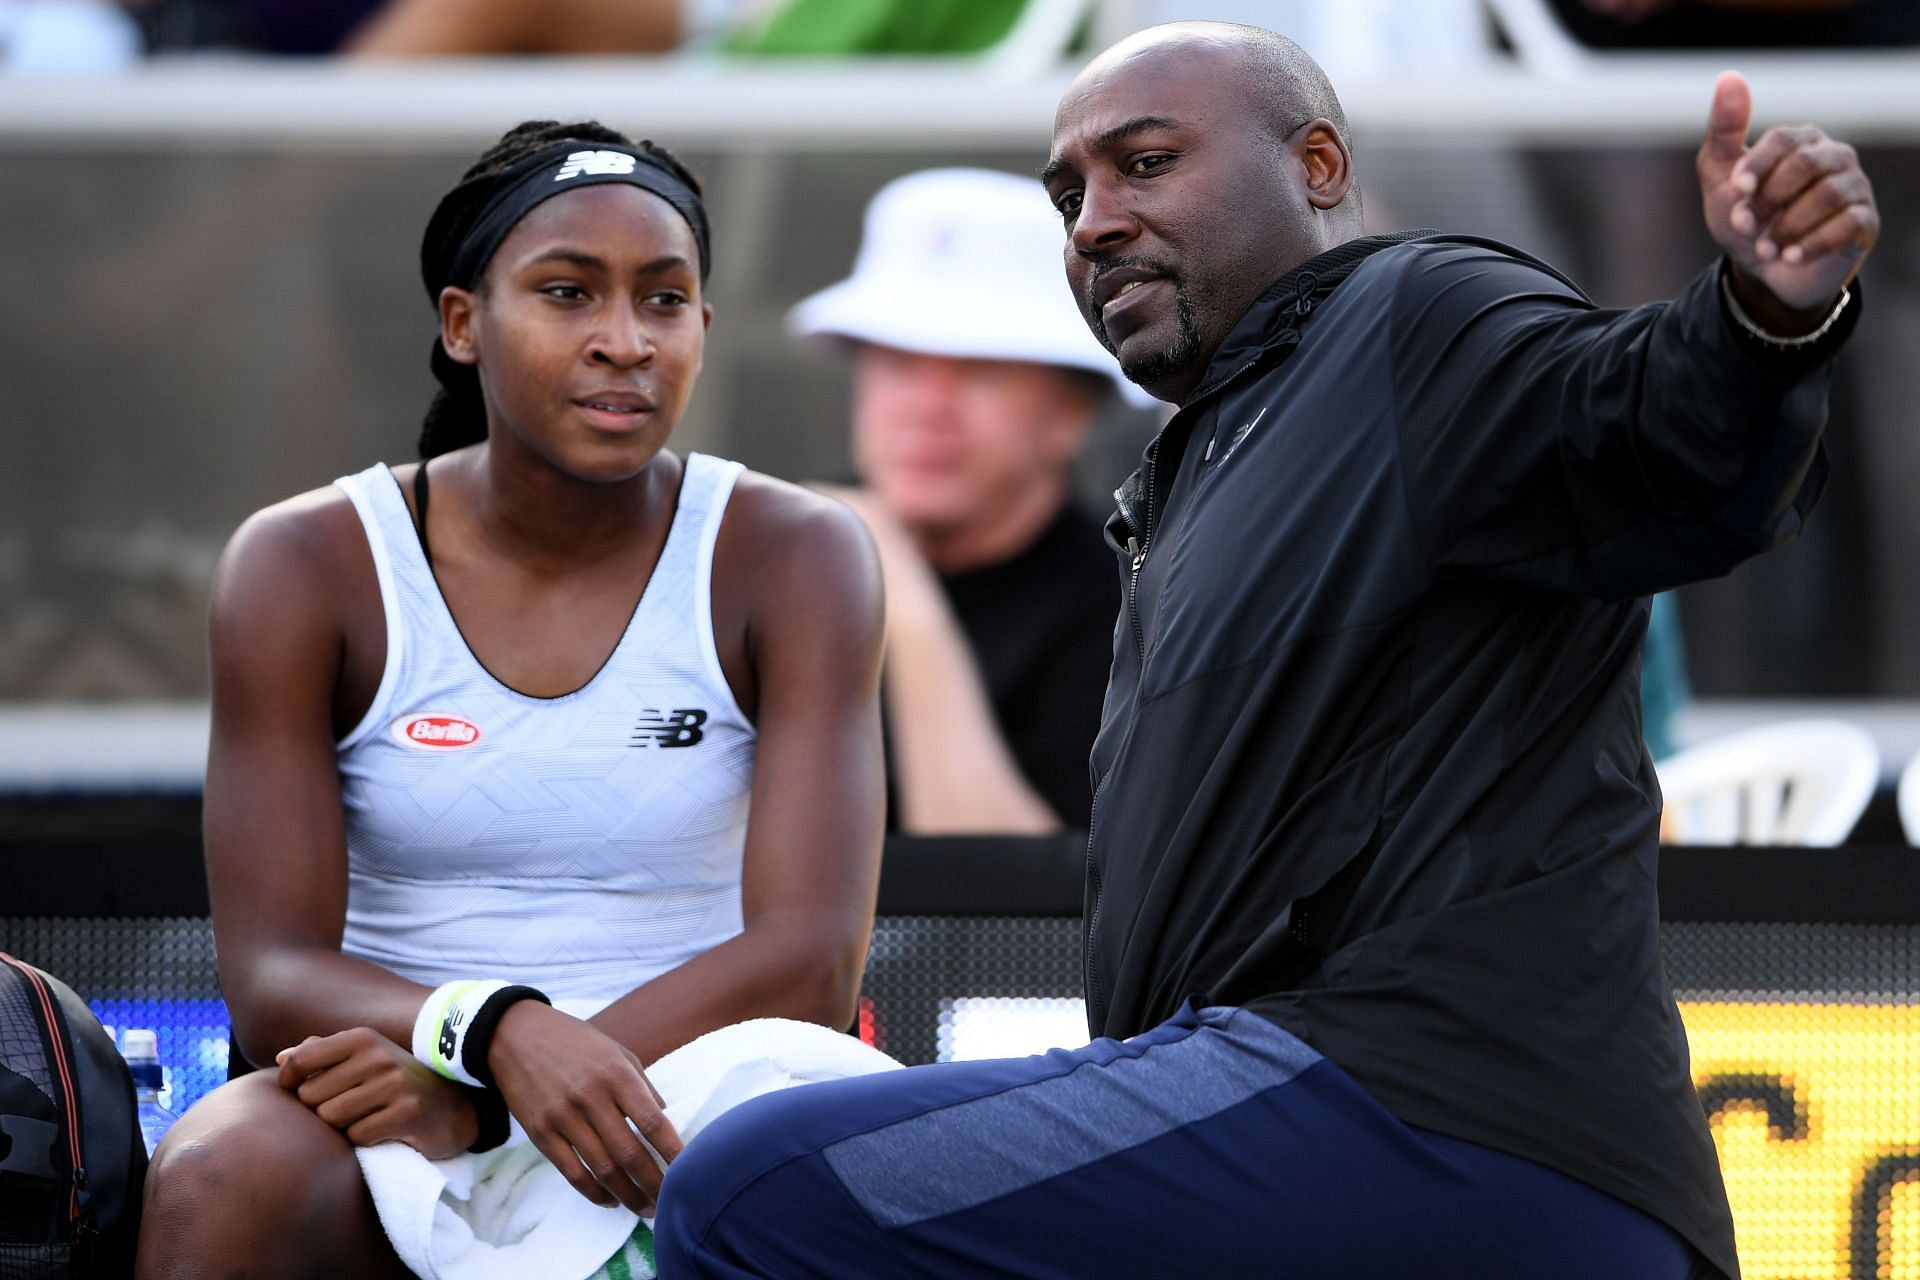 American tennis star Coco Gauff with her father, Corey